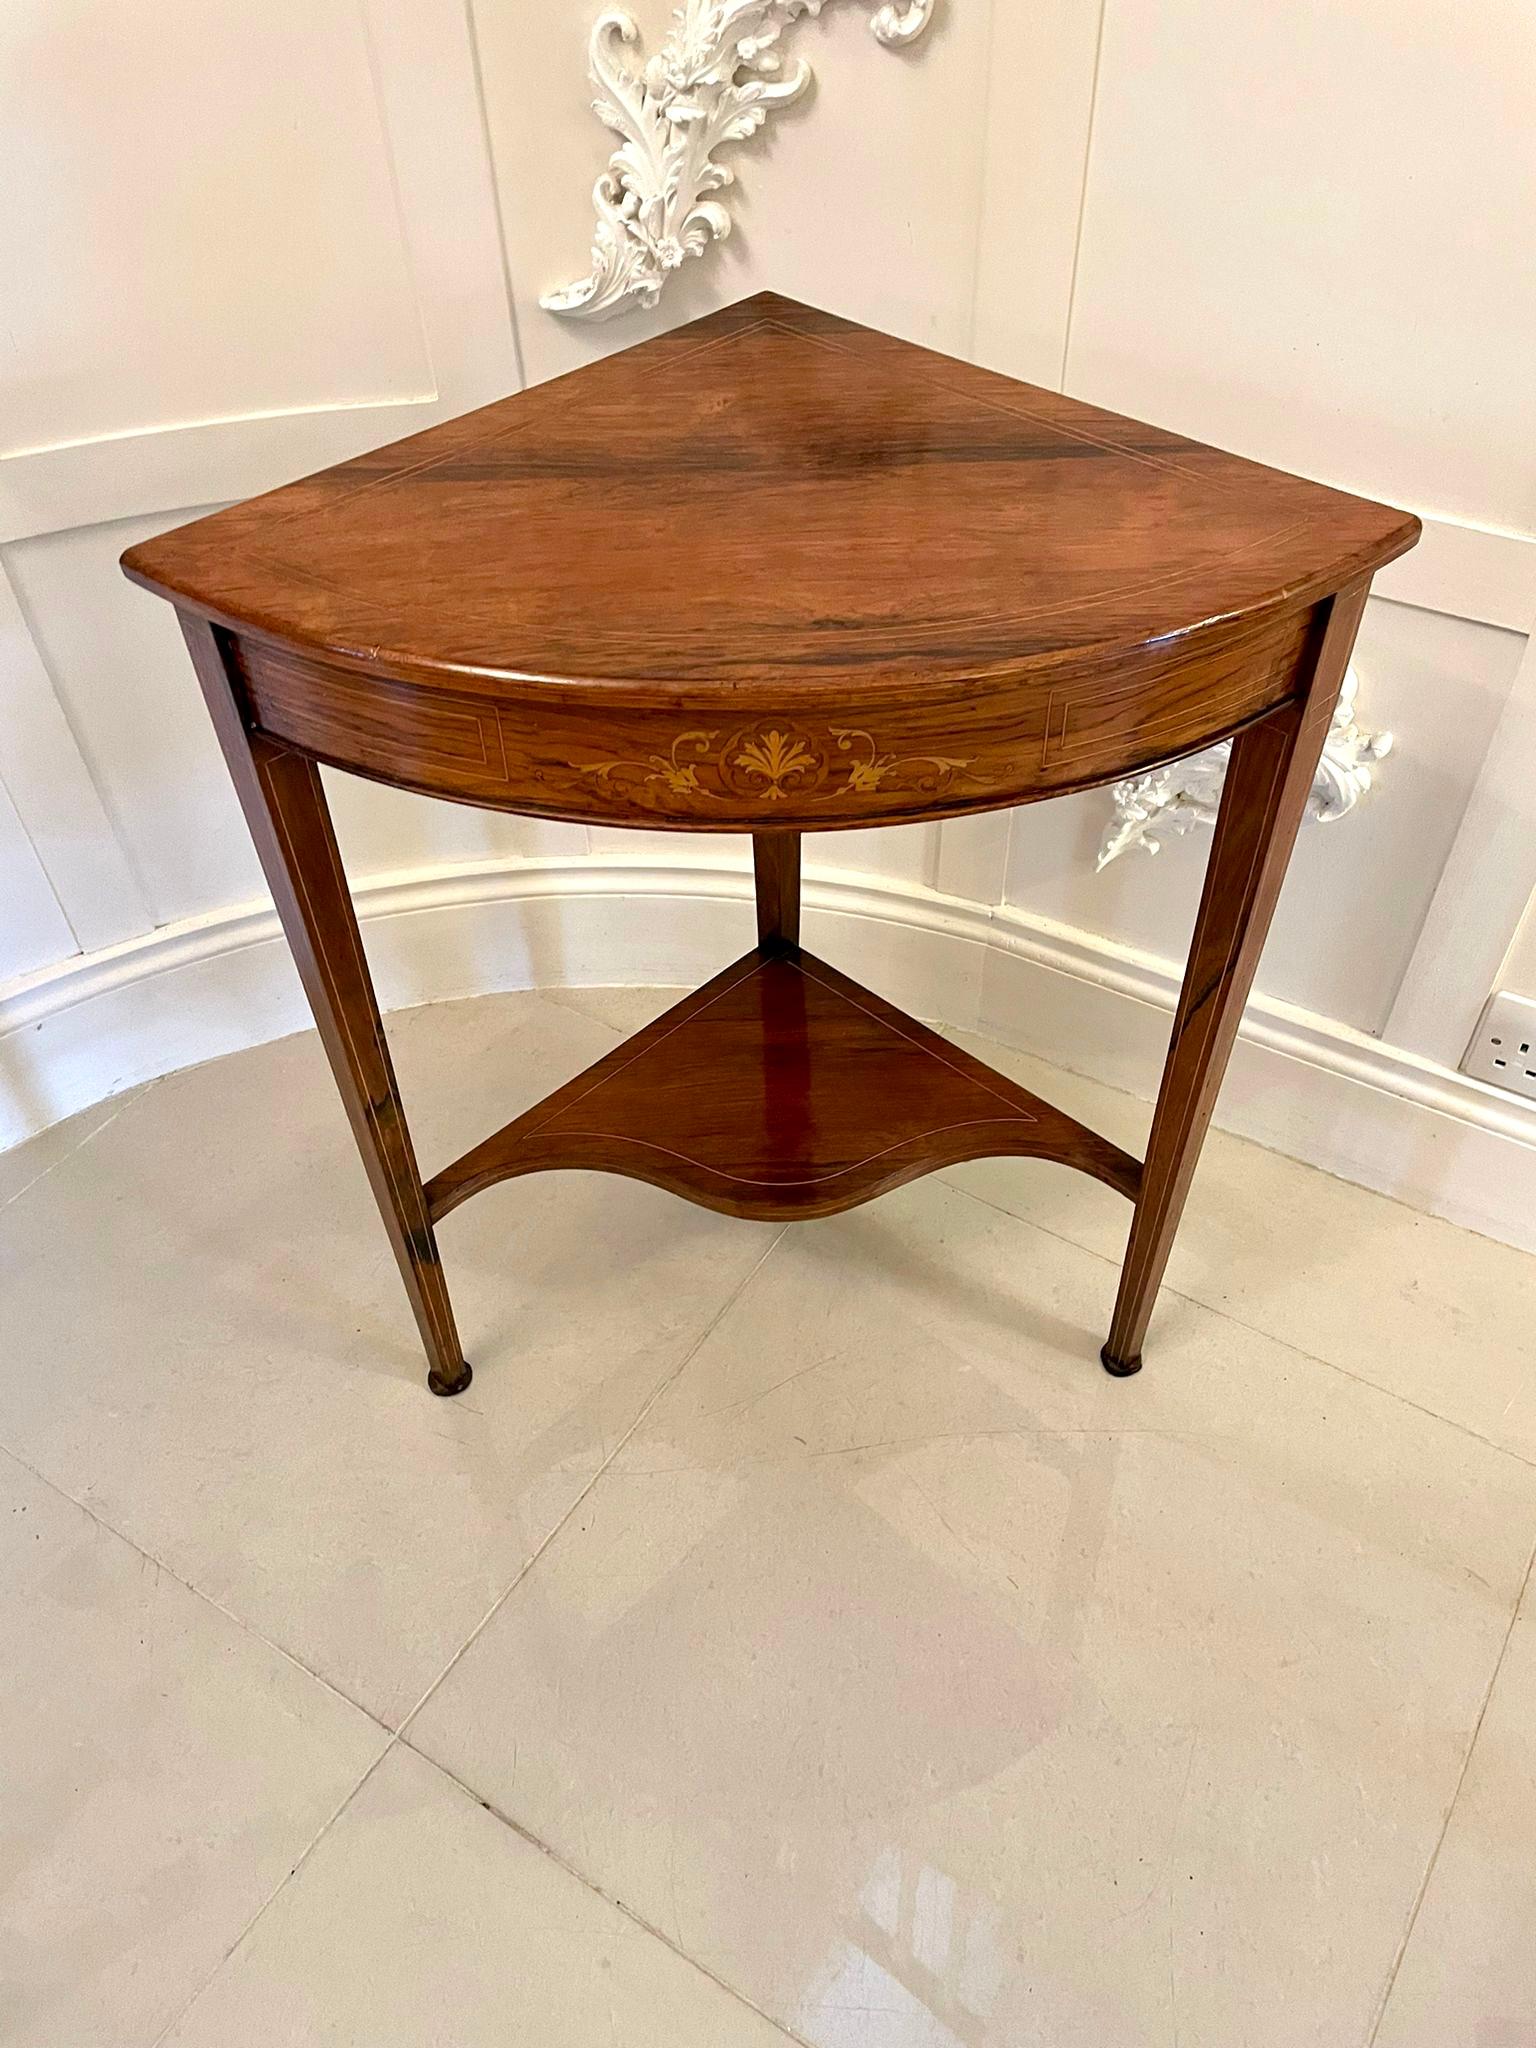 Early 20th Century Antique Edwardian Inlaid Rosewood Corner Lamp Table